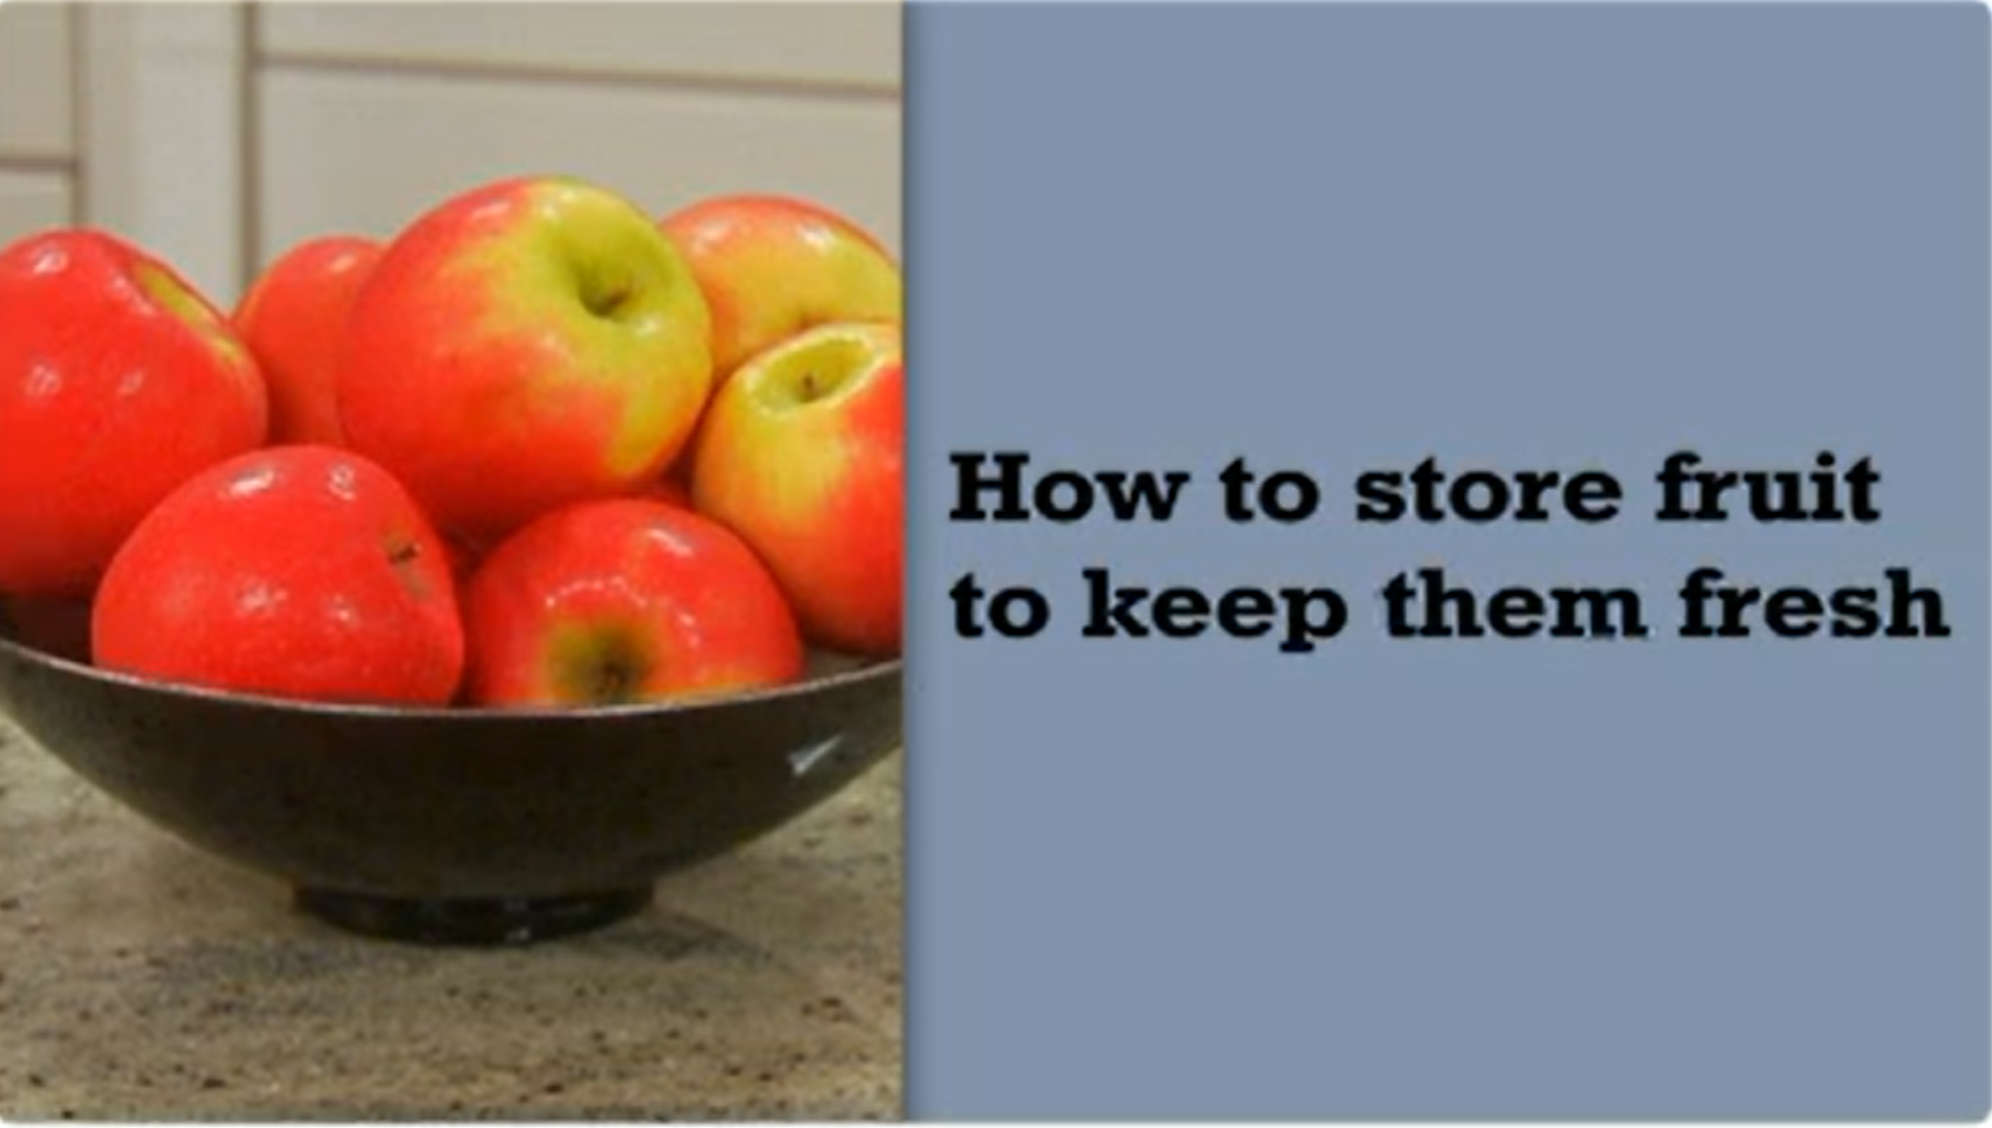 How to store fruit to keep them fresh